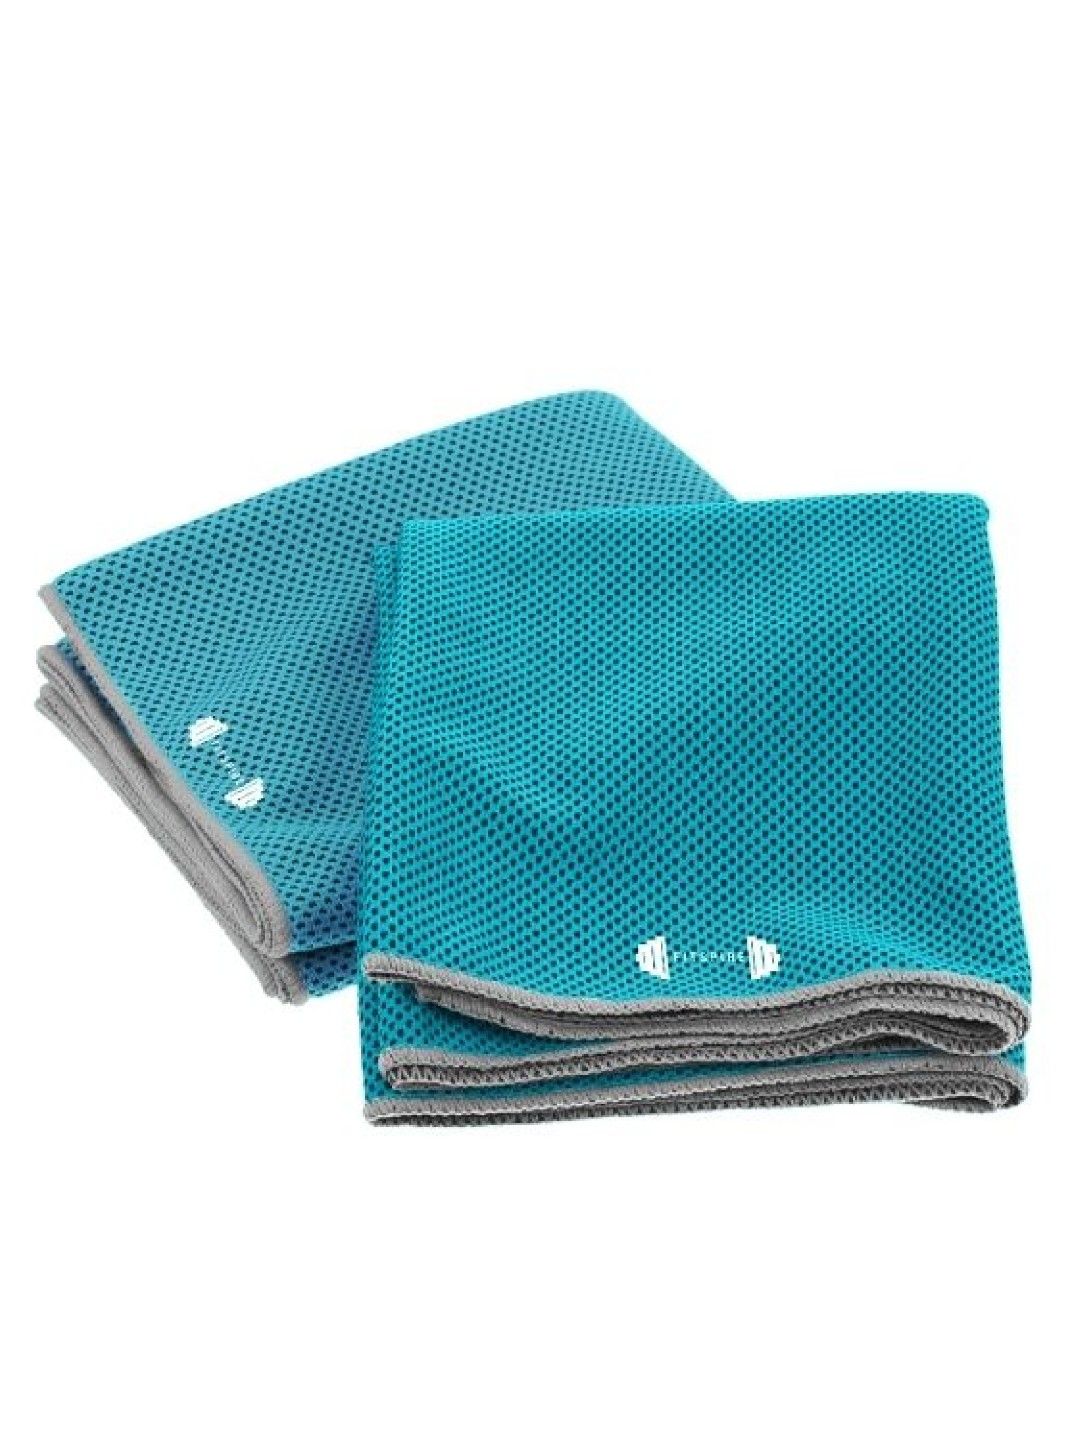 Sunbeams Lifestyle Fitspire Microfiber Cooling Towel PVA/Fabric (Set of 2) (No Color- Image 1)